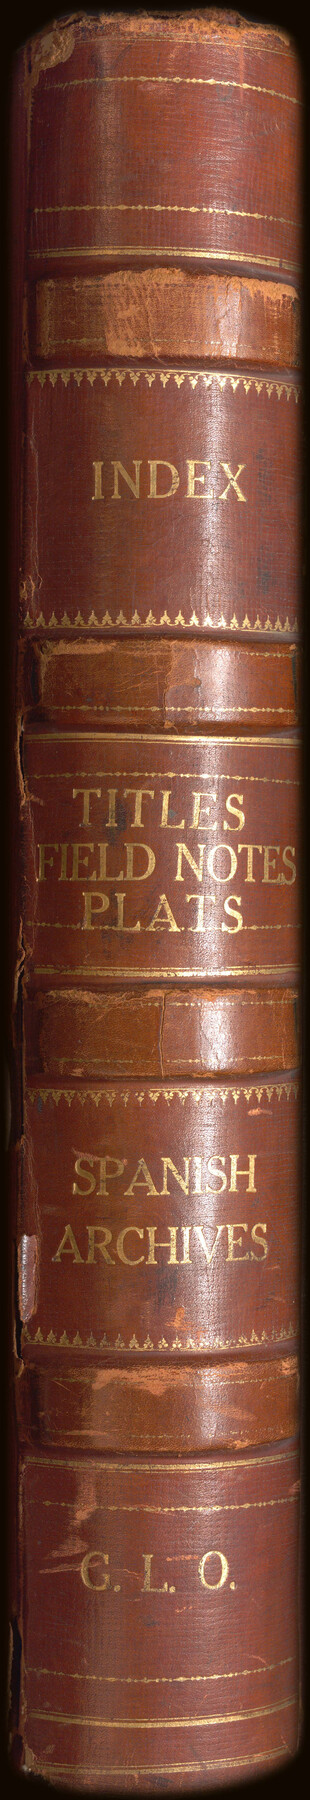 94534, Index to Titles, Field Notes, Plats: Spanish Archives, Historical Volumes